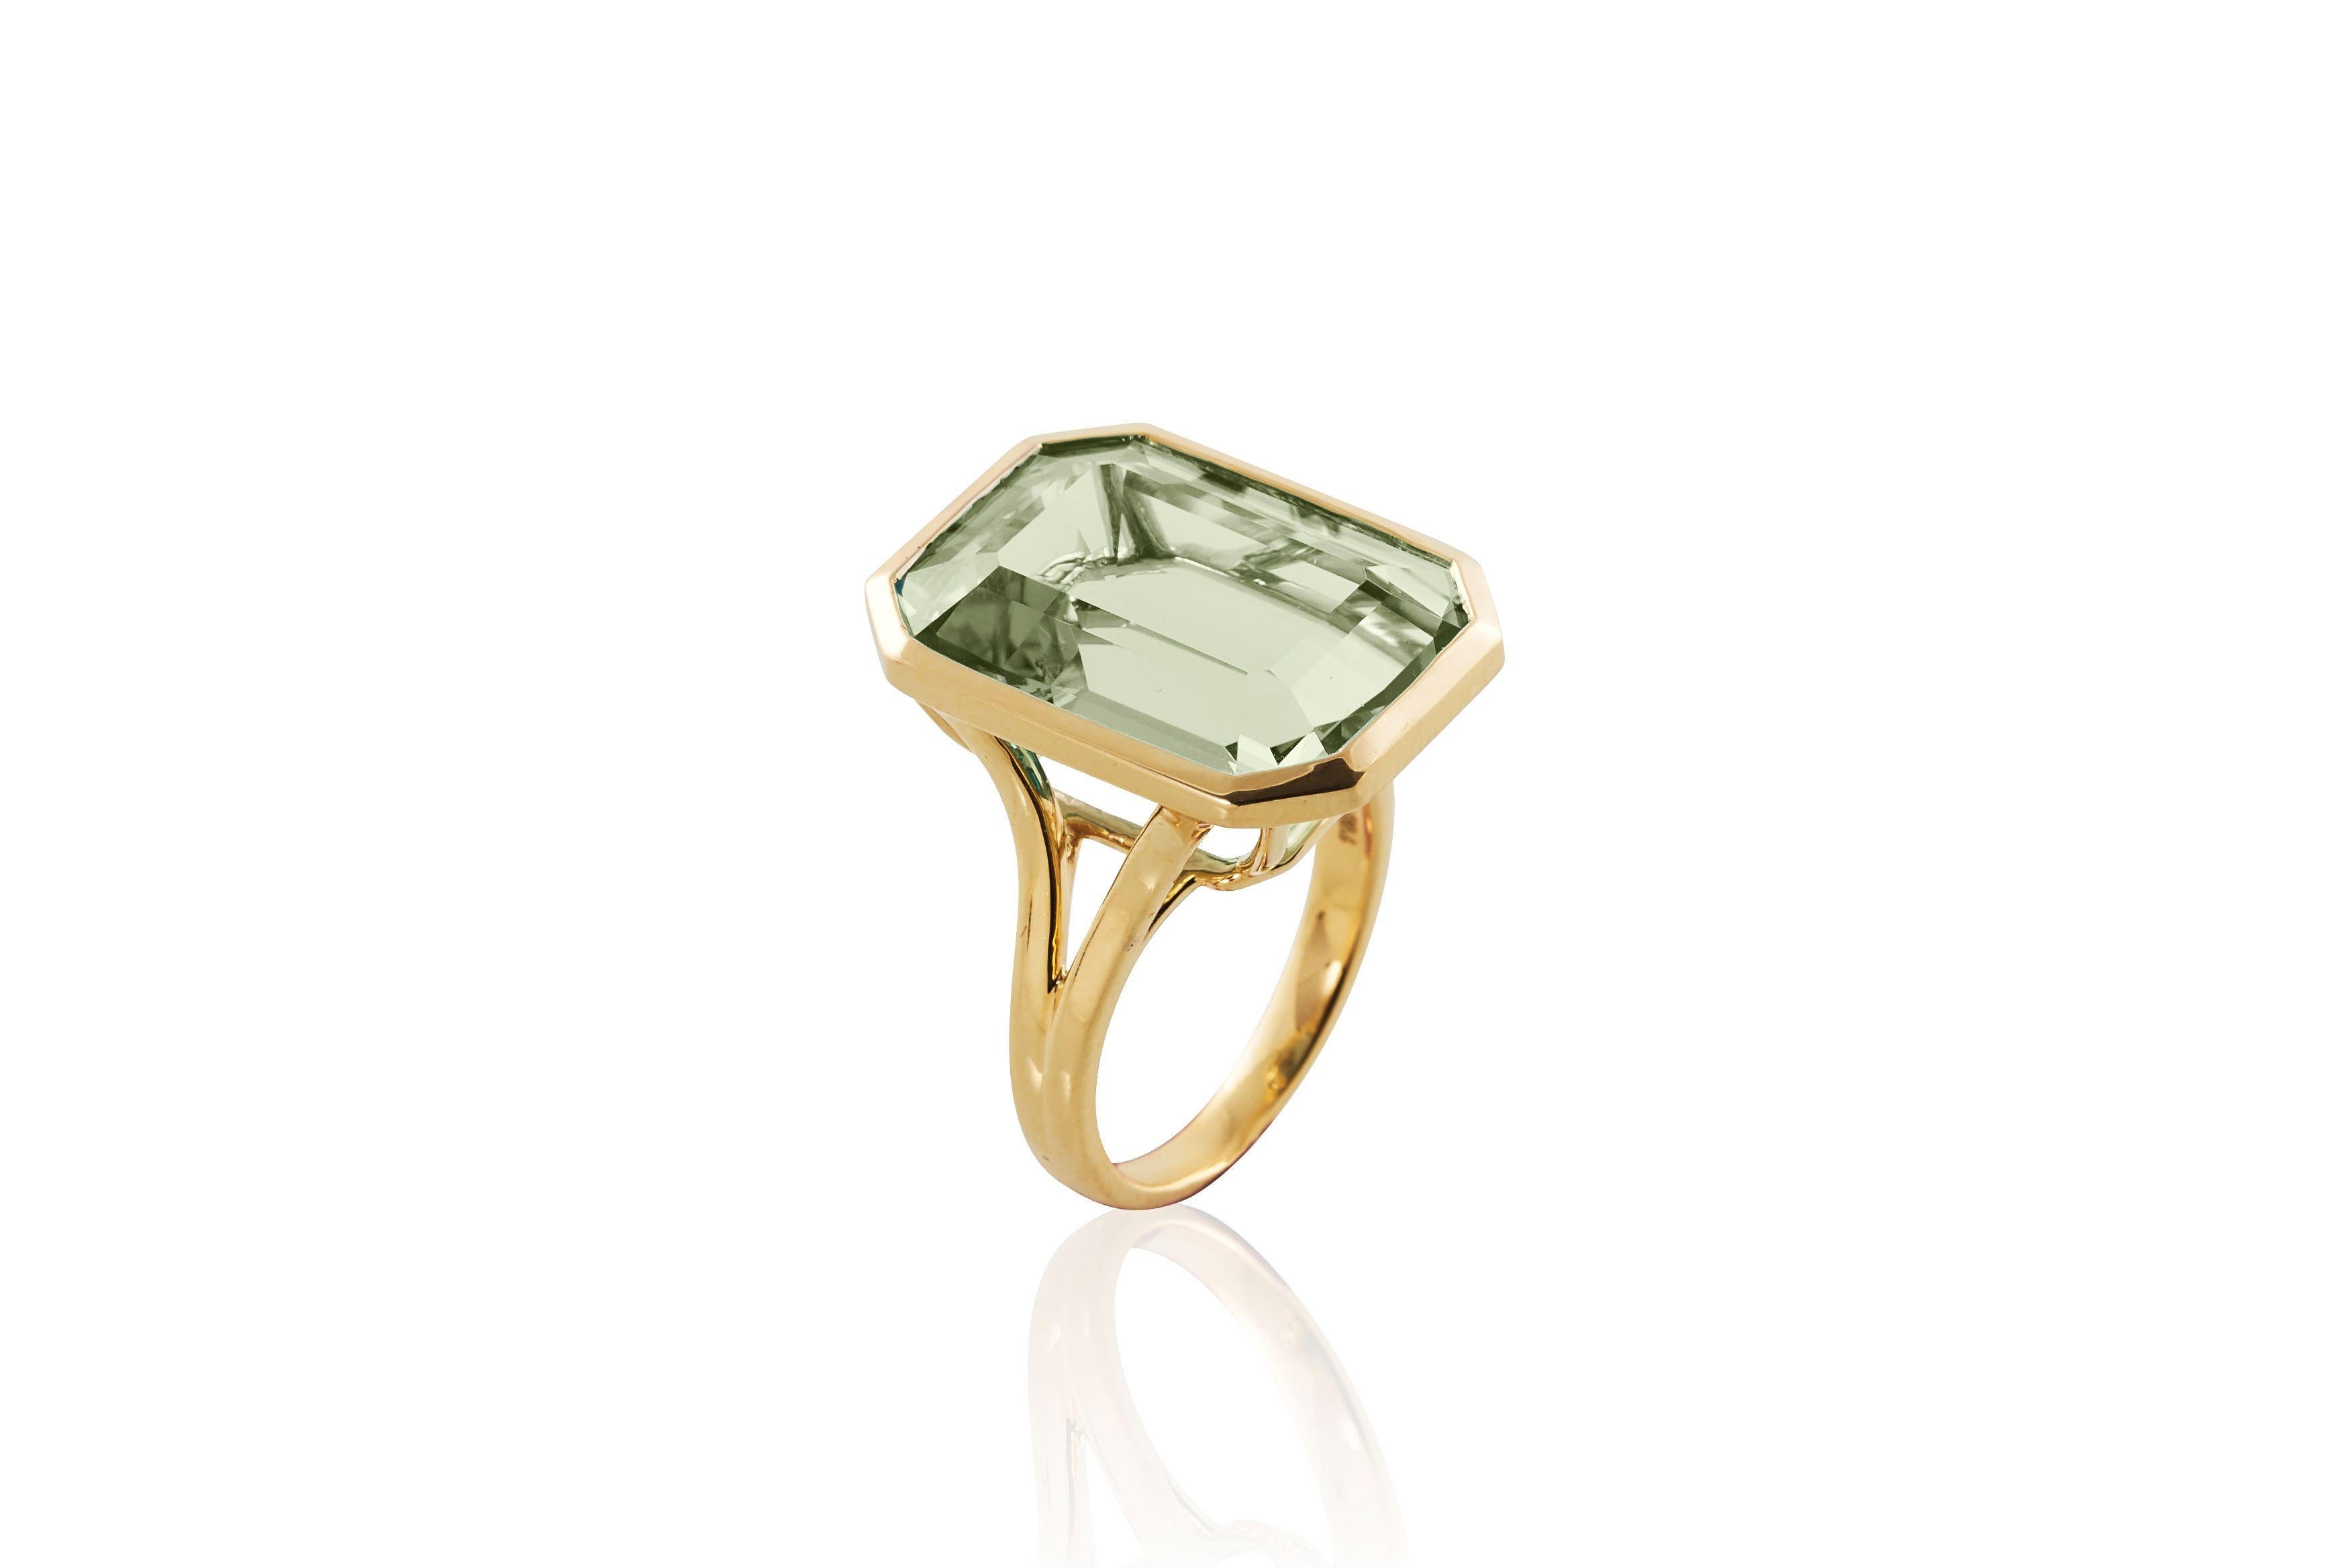 Prasiolite Emerald Cut Ring in 18K Yellow Gold, from 'Gossip' Collection

Stone Size:  14 x 20 mm

Gemstone Approx. Wt: Prasiolite- 17.99 Carats